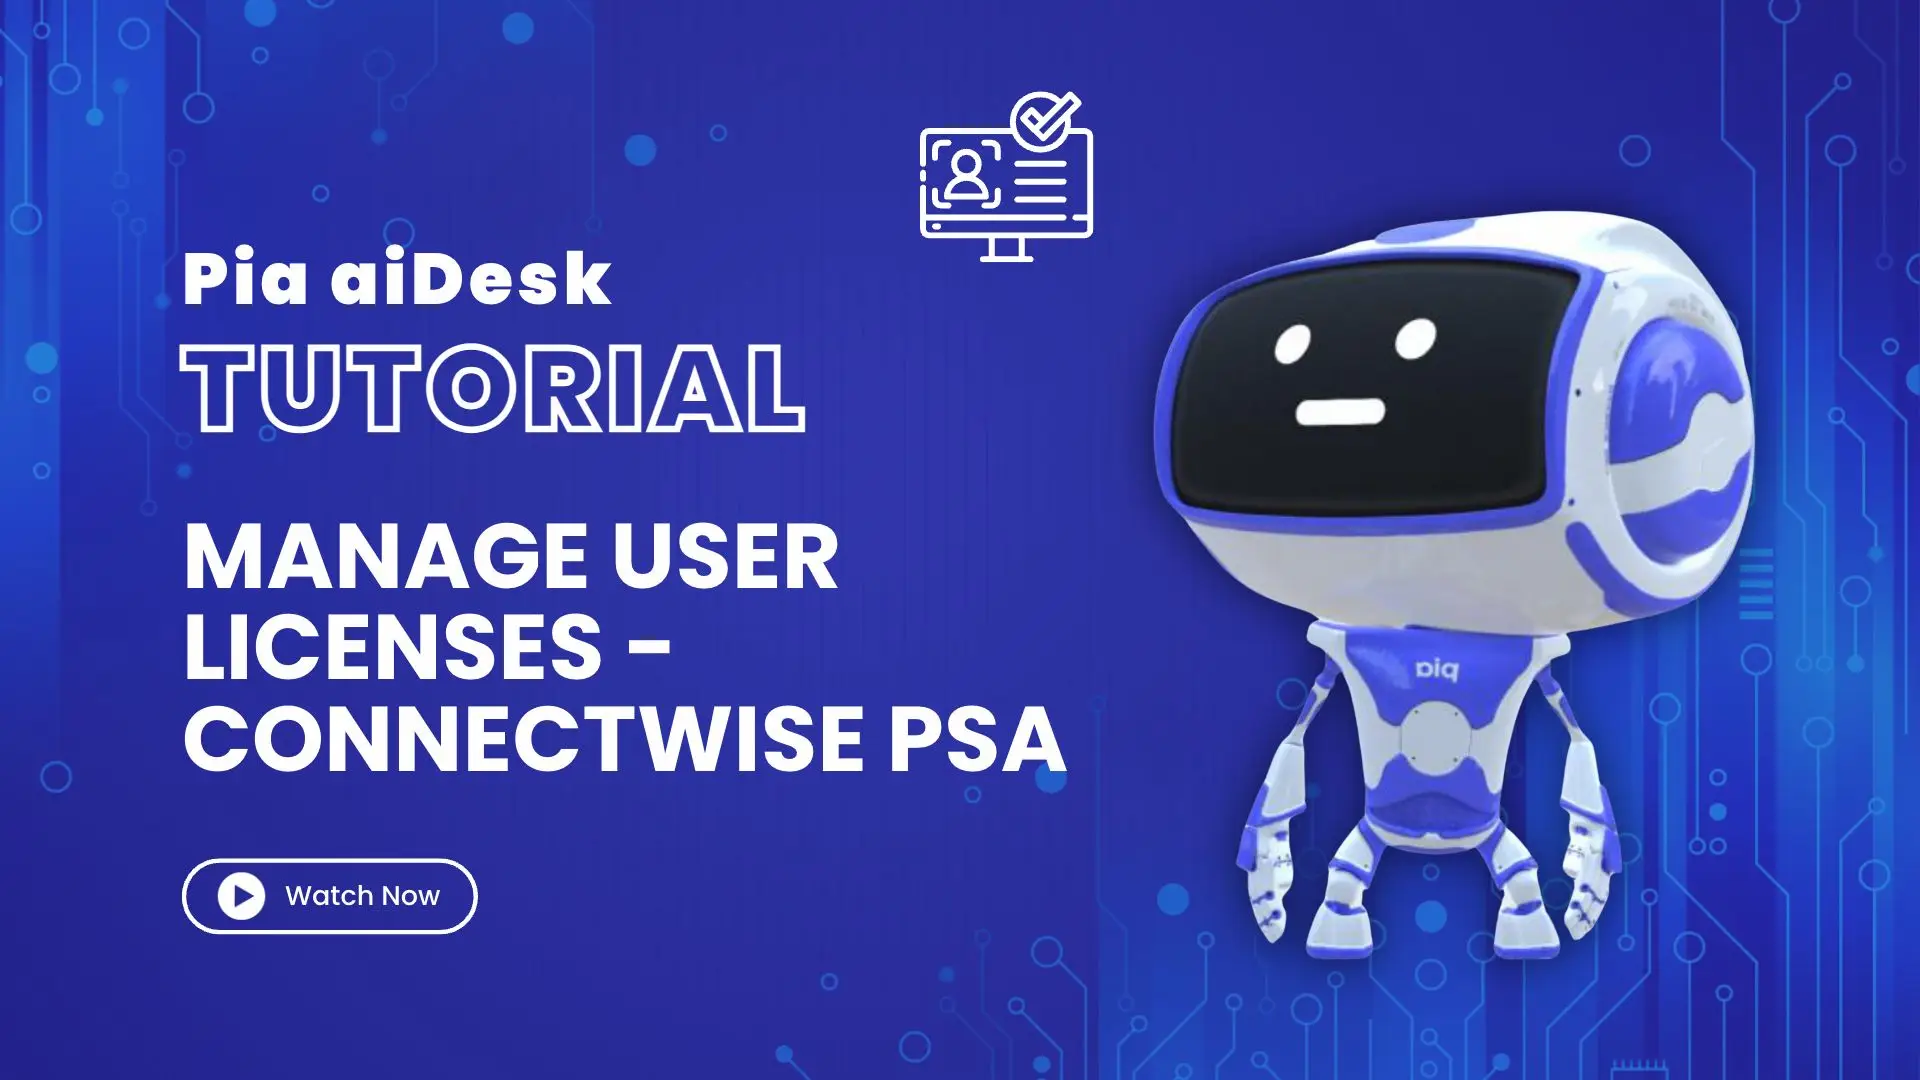 How to Manage User Licenses in MS O365 with Pia aiDesk in ConnectWise PSA